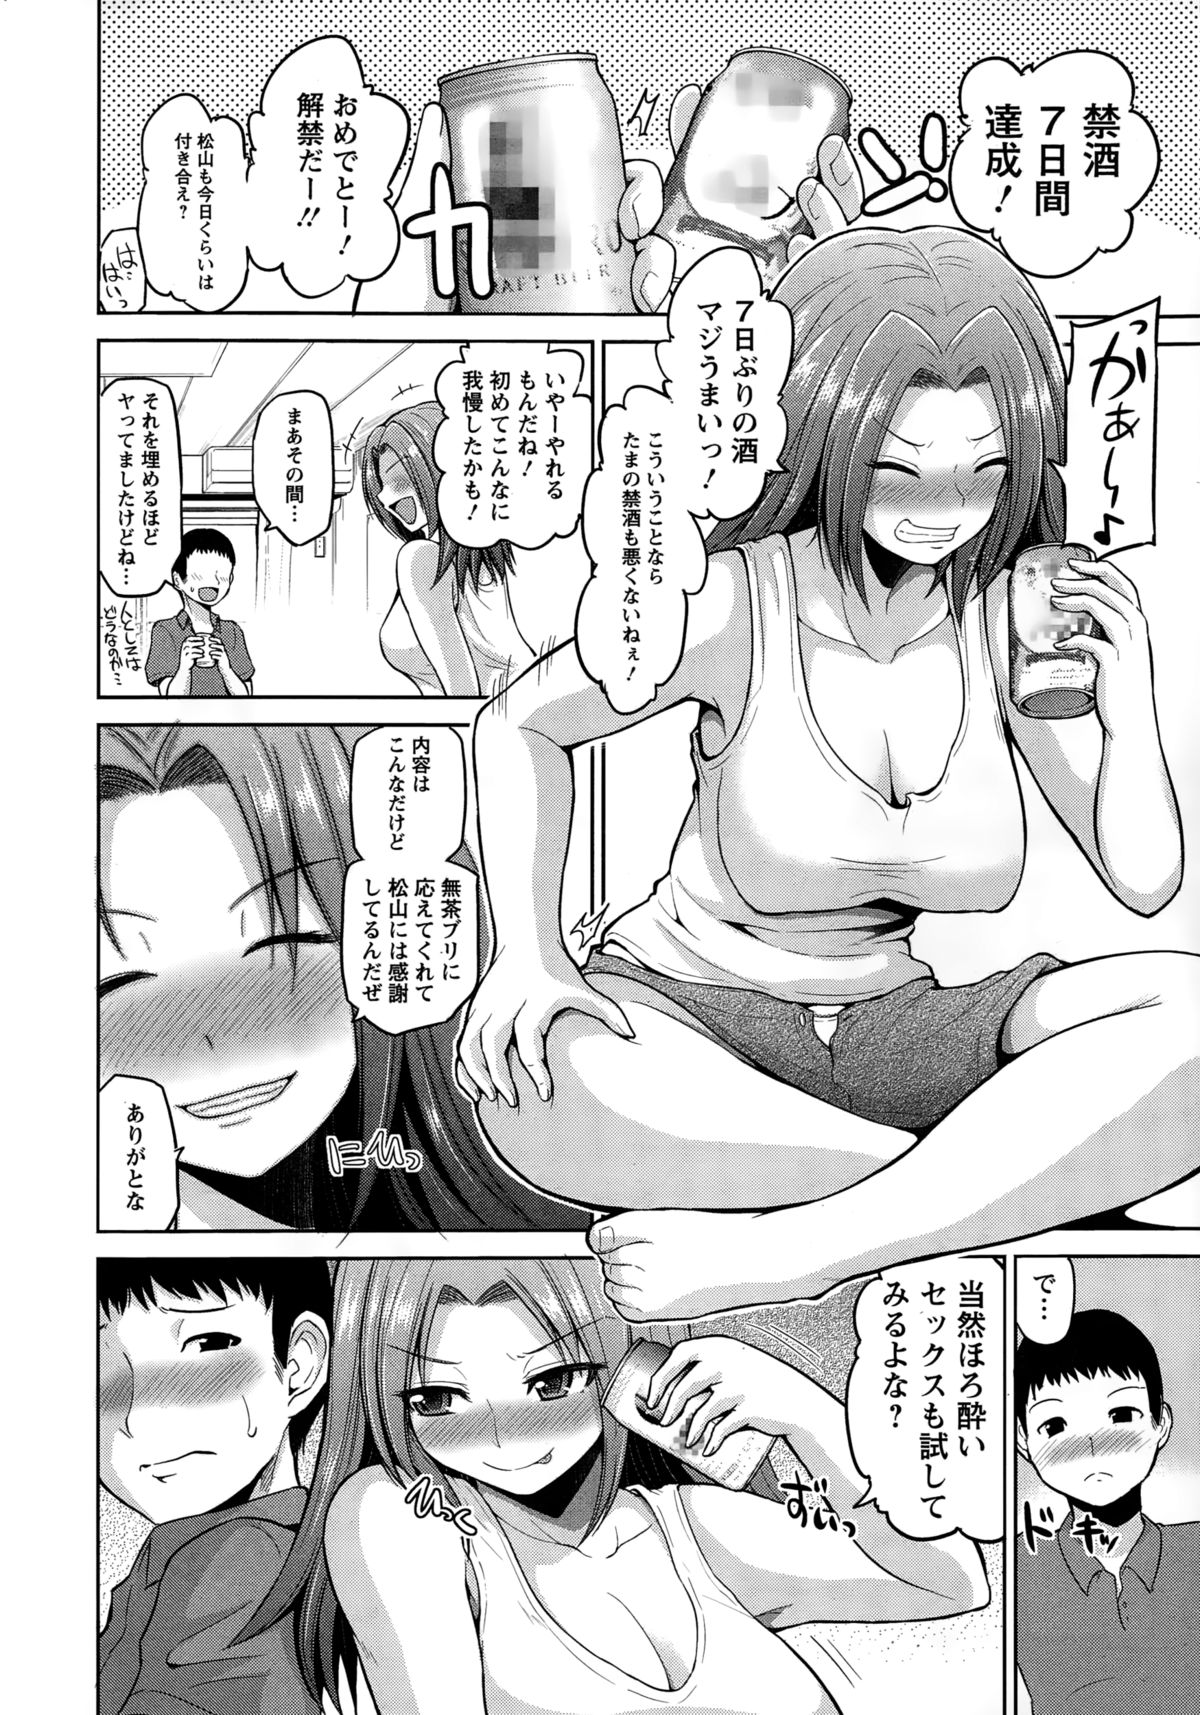 Action Pizazz DX 2015-01 page 18 full